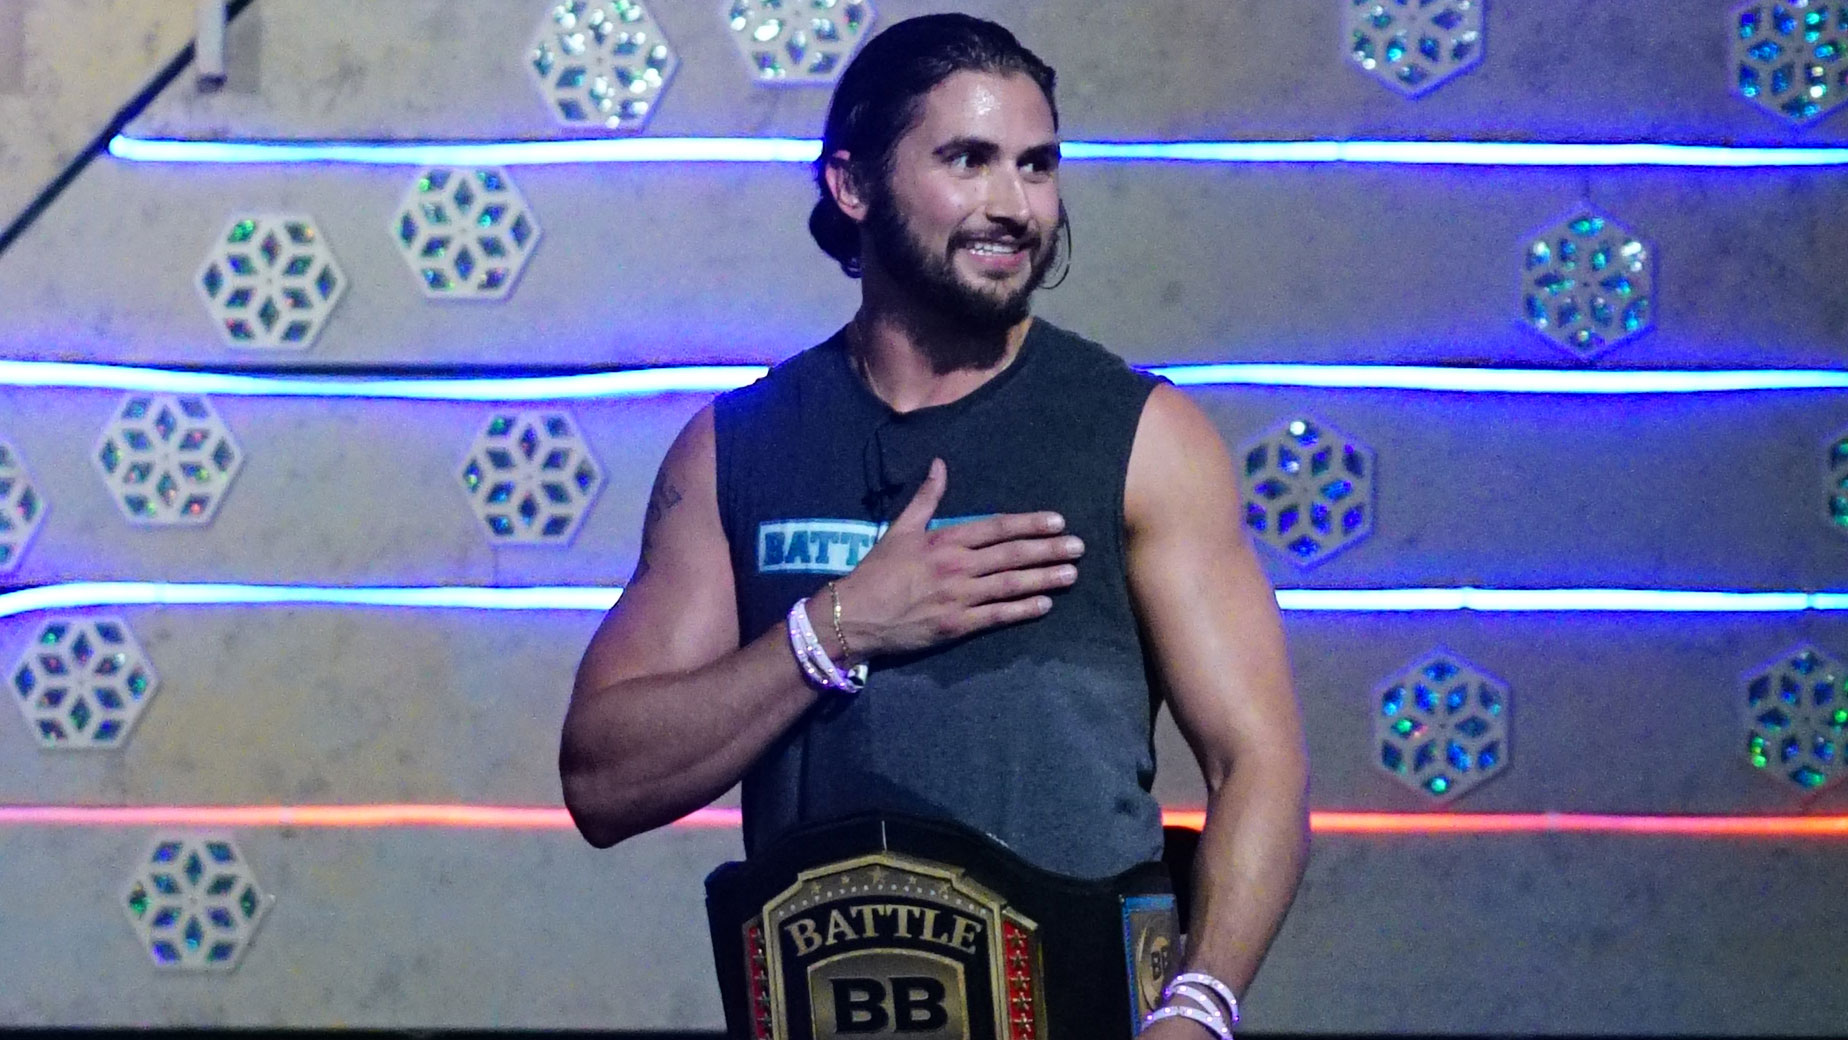 Big Brother 18 contestant Victor Arroyo won his way back into the game twice in one season thanks to Battle Back twists.